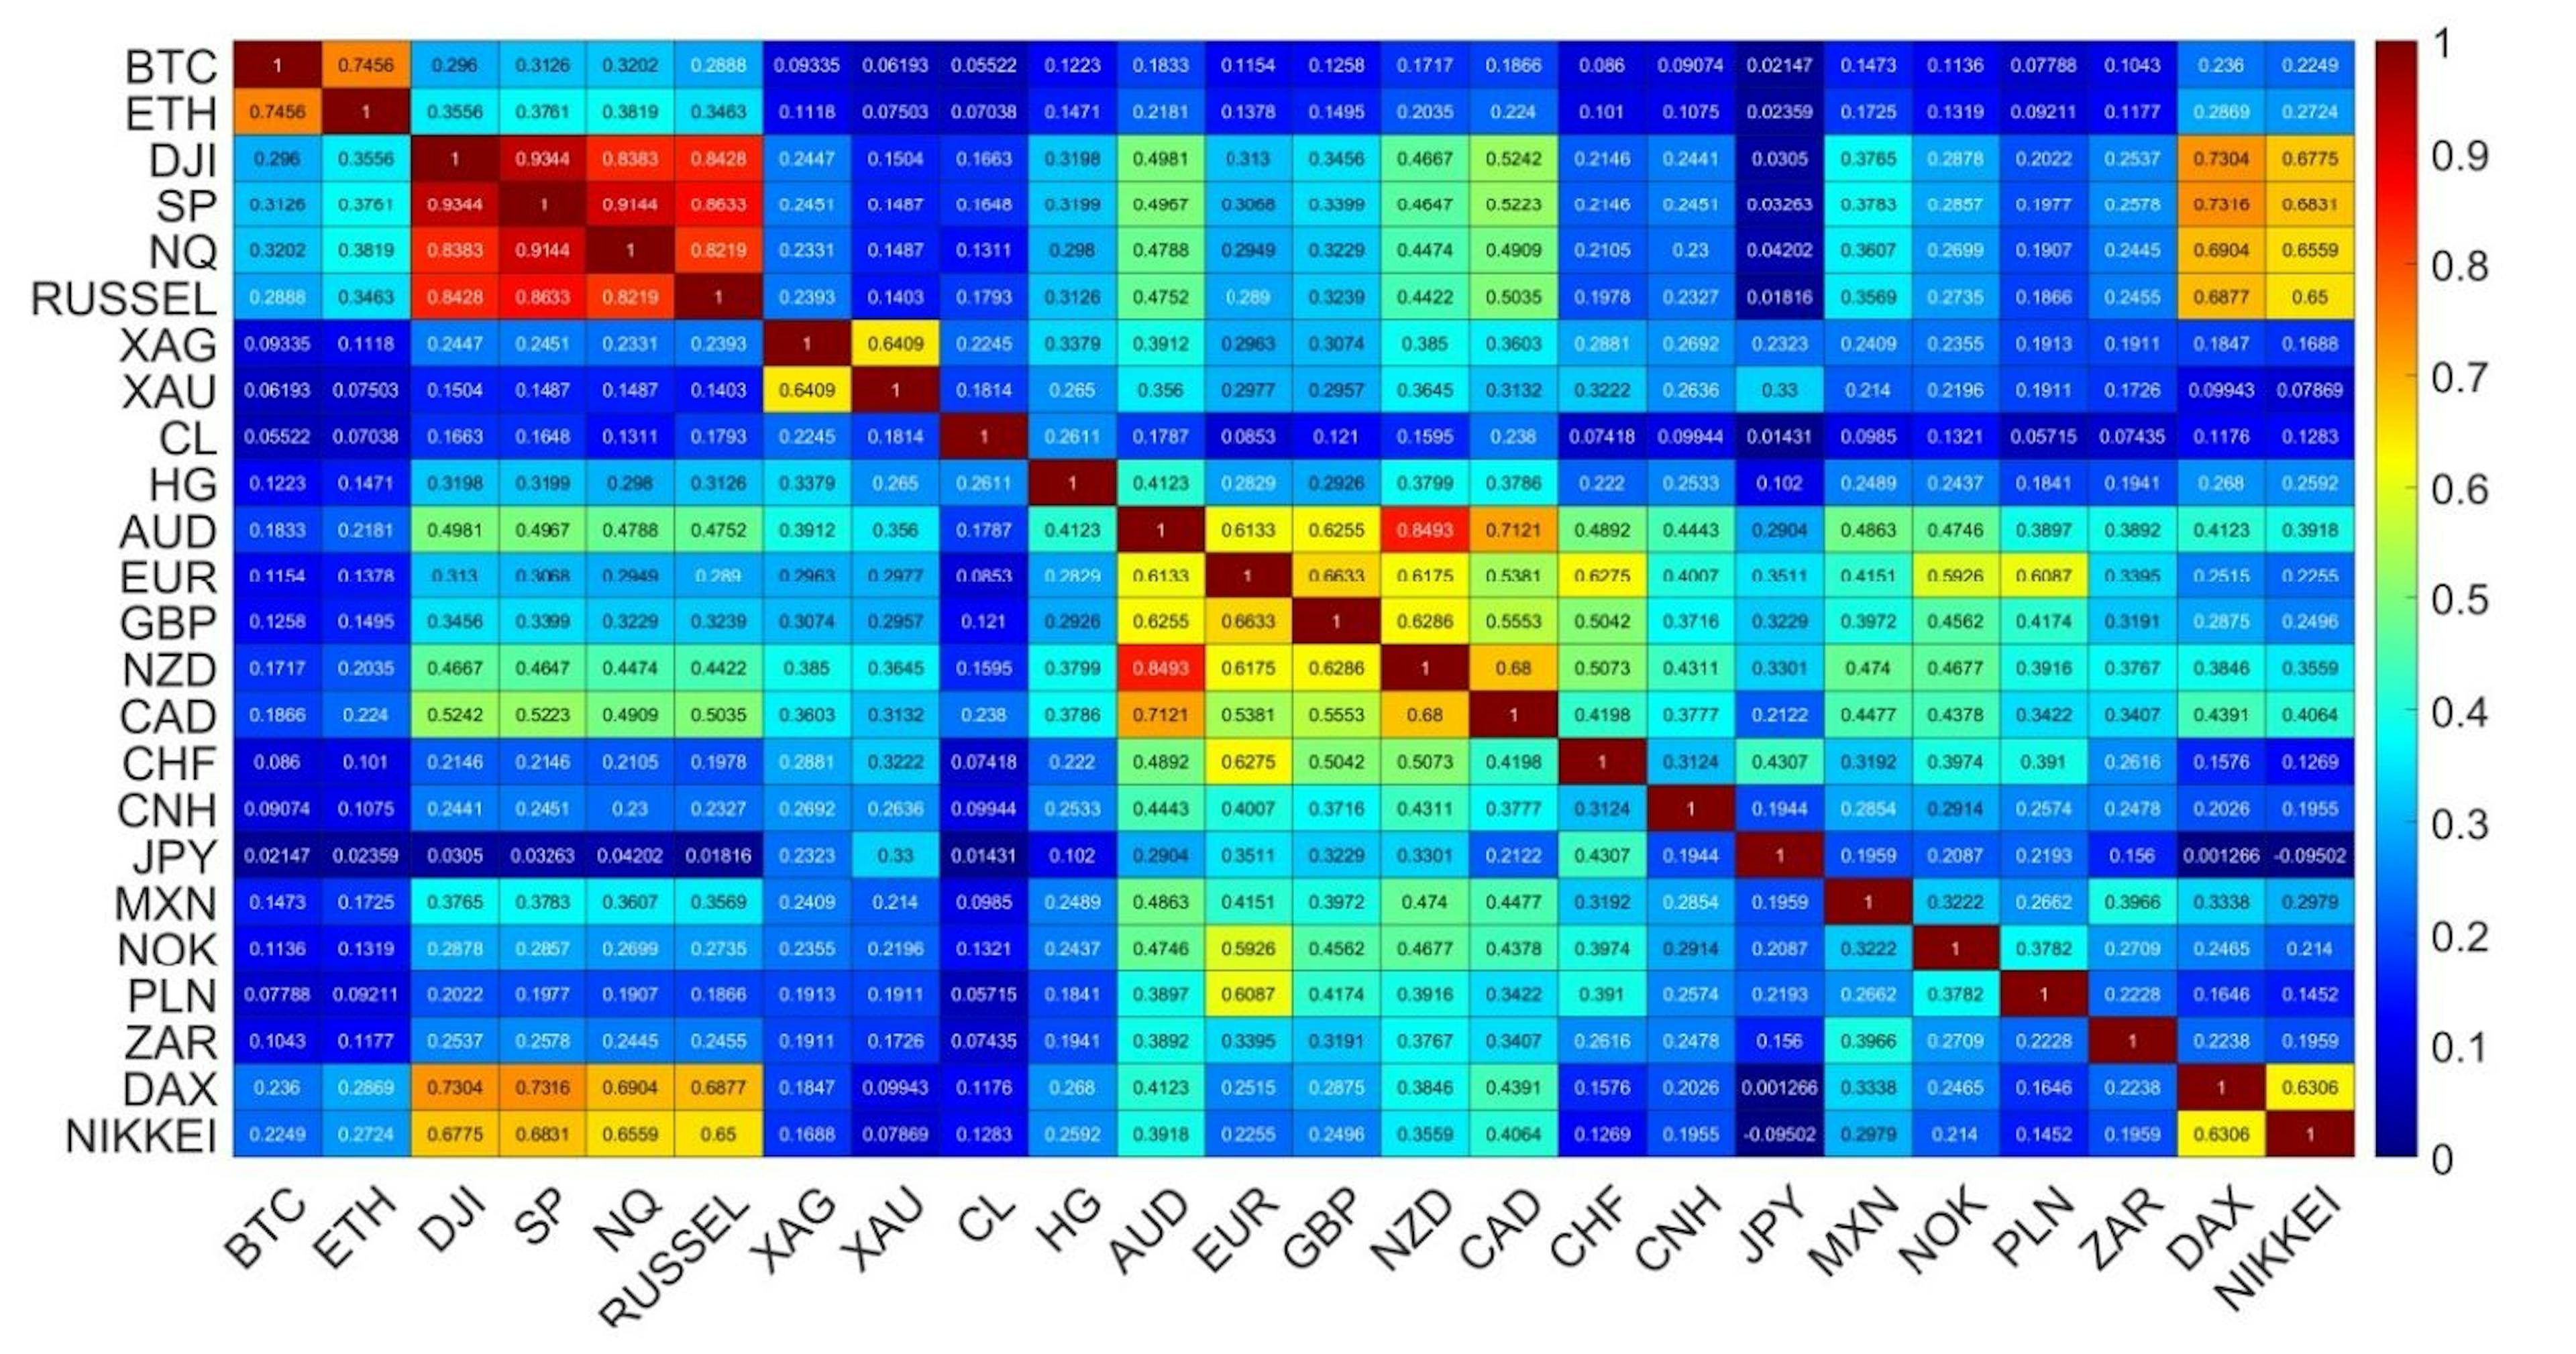 Figure 2. Correlation matrix of Pearson coefficients calculated for all possible pairs of the time series considered in this study (January to October 2022). All the values are statistically significant with p-value < 0.00001, except DAX vs. JPY, where p = 0.1.